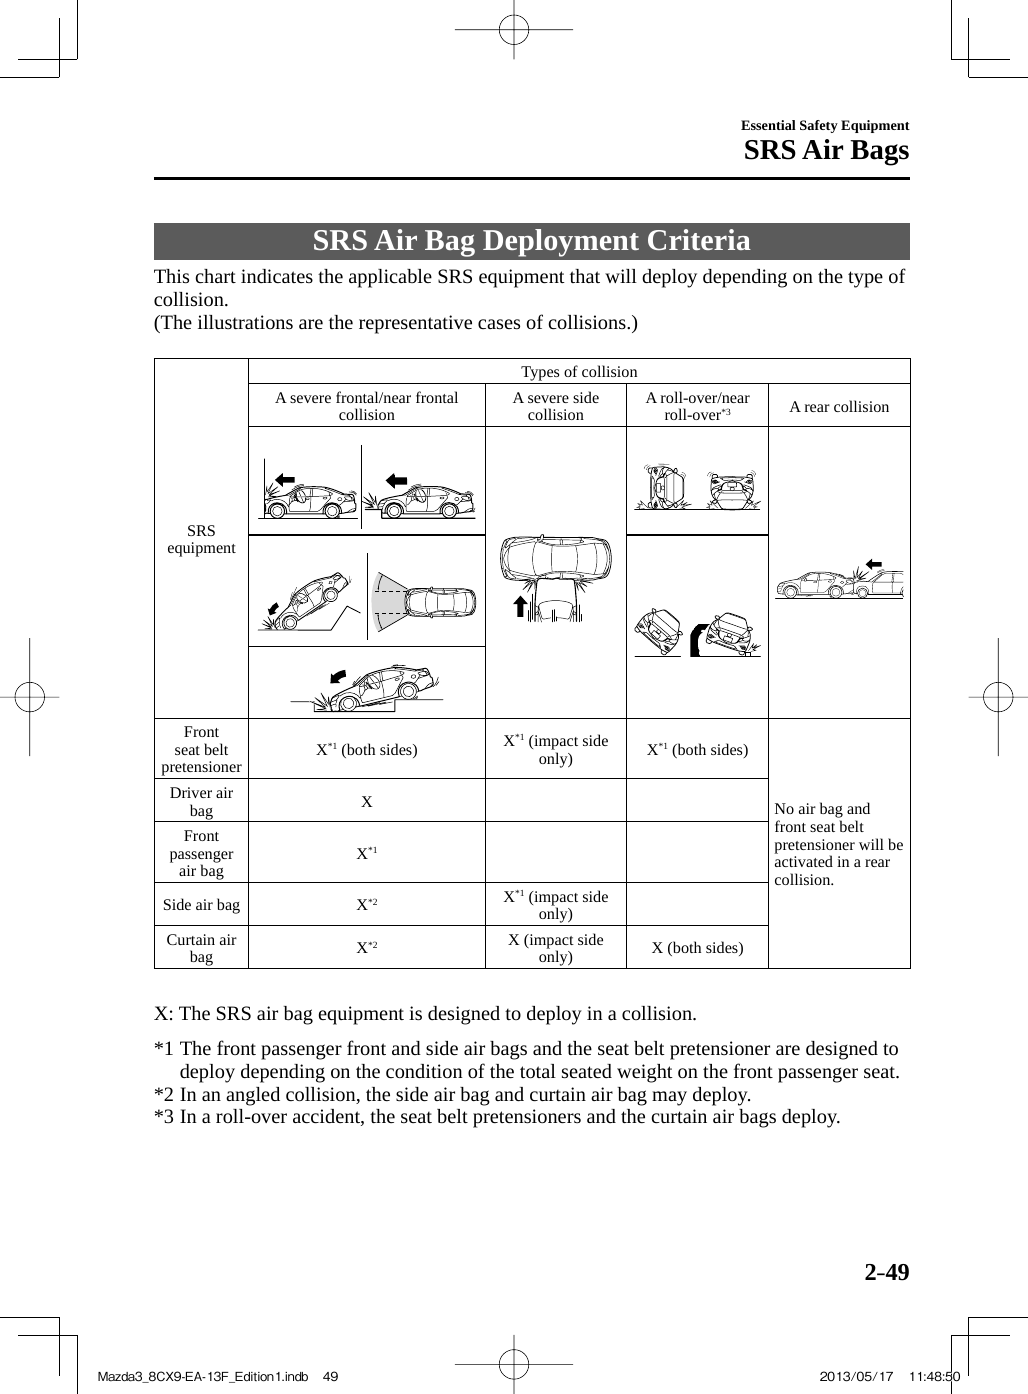 2–49Essential Safety EquipmentSRS Air Bags SRS Air Bag Deployment Criteria            This chart indicates the applicable SRS equipment that will deploy depending on the type of collision.  (The illustrations are the representative cases of collisions.)   SRS equipment  Types of collision  A severe frontal/near frontal collision   A severe side collision   A  roll-over/near roll-over *3    A rear collision  Front seat belt pretensioner   X *1  (both sides)   X *1  (impact side only)   X *1  (both sides)  No air bag and front seat belt pretensioner will be activated in a rear collision.  Driver  air bag   X  Front passenger air bag   X *1   Side air bag   X *2    X *1  (impact side only)  Curtain  air bag   X *2    X (impact side only)   X (both sides)      X: The SRS air bag equipment is designed to deploy in a collision.      *1 The front passenger front and side air bags and the seat belt pretensioner are designed to deploy depending on the condition of the total seated weight on the front passenger seat.    *2 In an angled collision, the side air bag and curtain air bag may deploy.    *3 In a roll-over accident, the seat belt pretensioners and the curtain air bags deploy.    Mazda3_8CX9-EA-13F_Edition1.indb   49Mazda3_8CX9-EA-13F_Edition1.indb   49 2013/05/17   11:48:502013/05/17   11:48:50